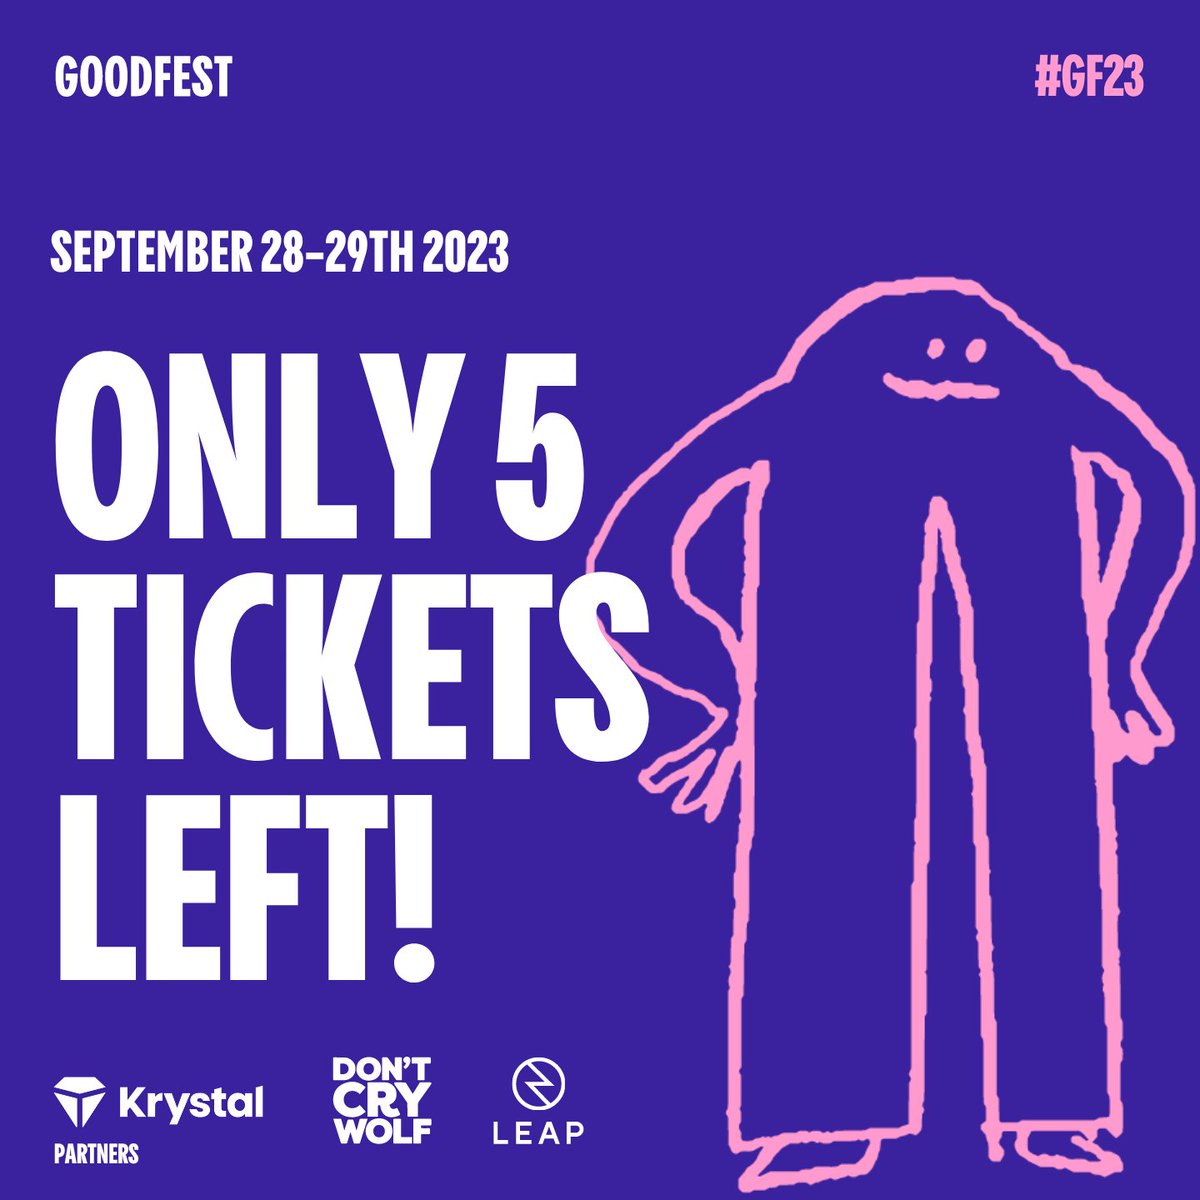 Only 5 #GF23 tickets left! 🔗 in bio We are so excited and appreciative of everyone who has supported, invested, joined, partnered, and who are a part of #GF23. Special thanks to our partners Don't Cry Wolf, @KrystalHosting @madebyleap and the stunning venue @BedruthanHotel 🙌